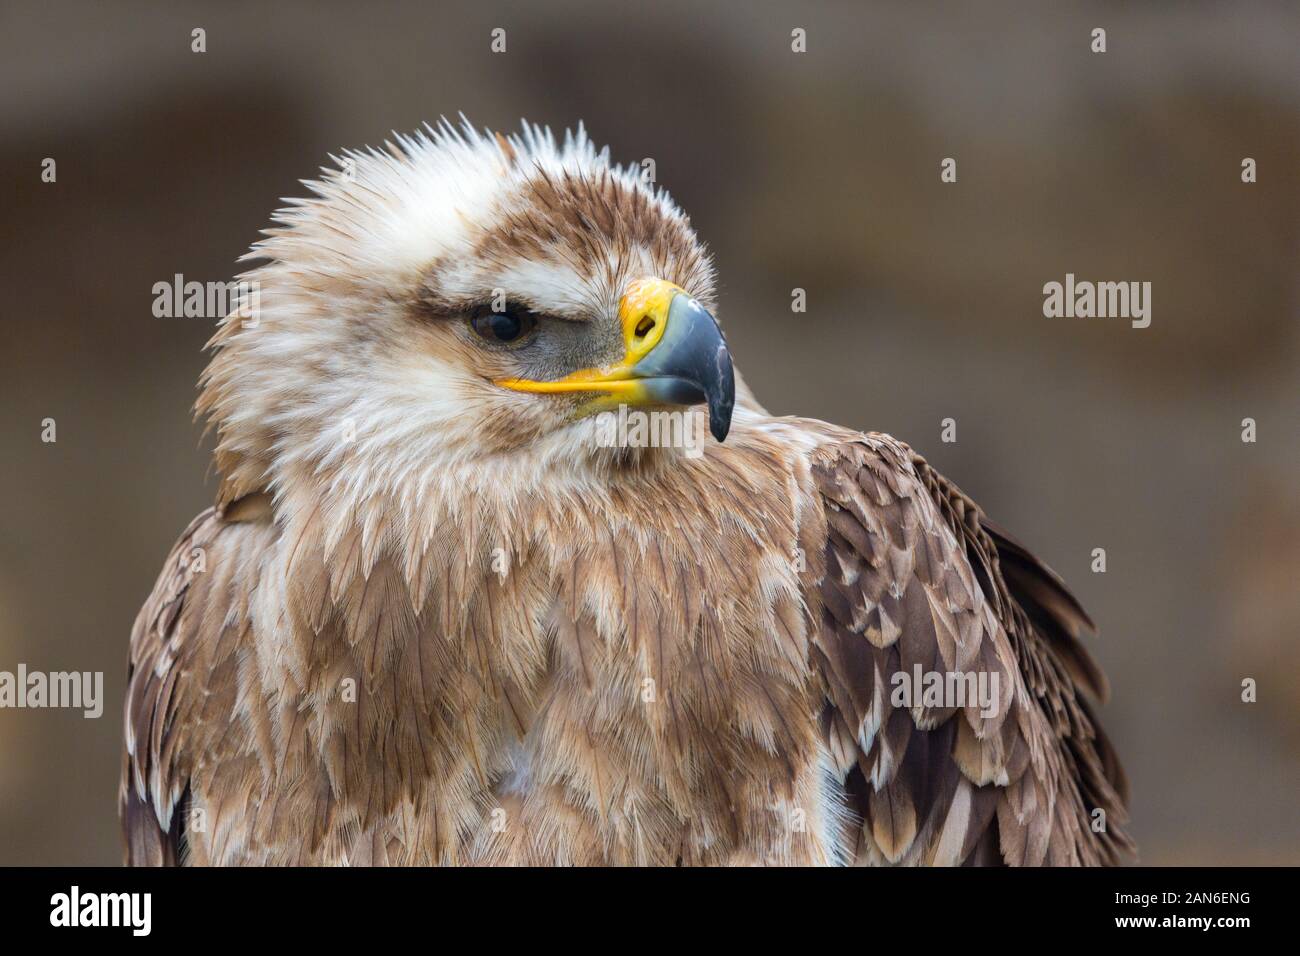 Profile of an Eastern Imperial Eagle (aquila heliaca) looking to the right. Portrait with details of eyes, yellow / black beak, feathers. Stock Photo